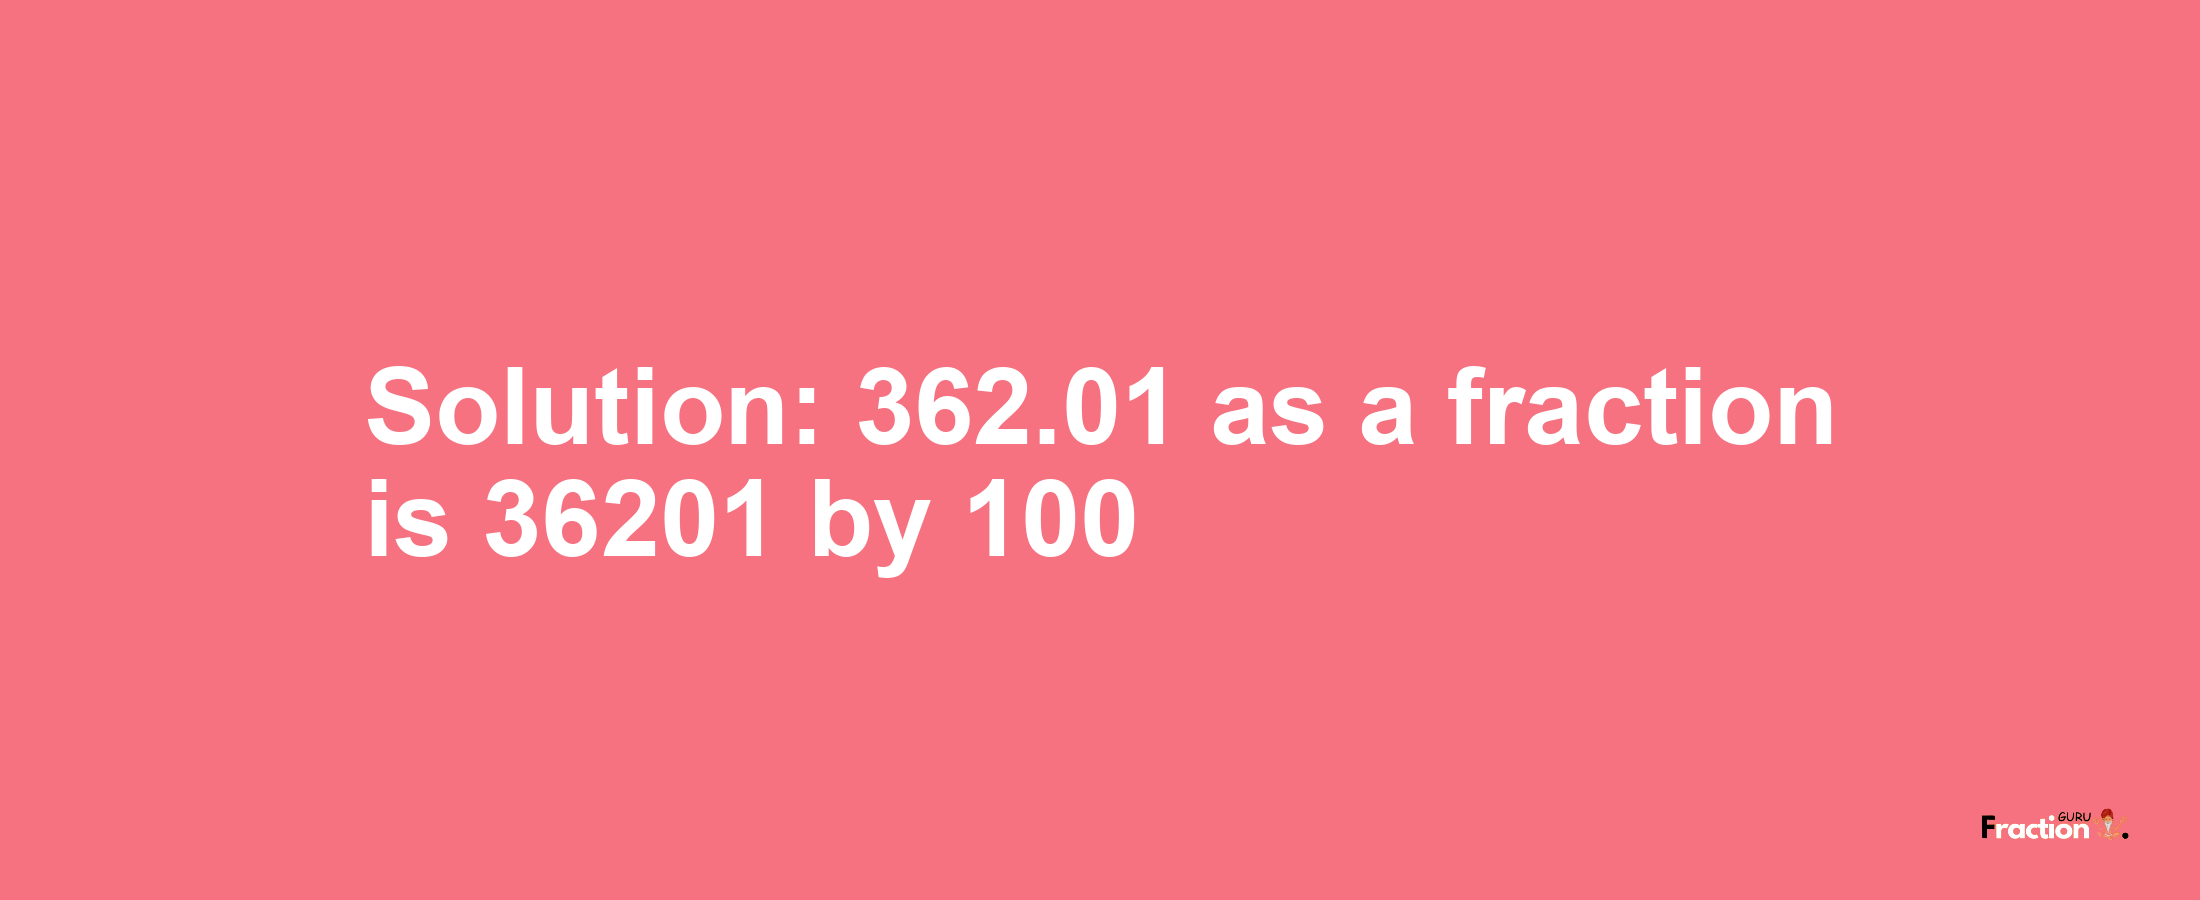 Solution:362.01 as a fraction is 36201/100